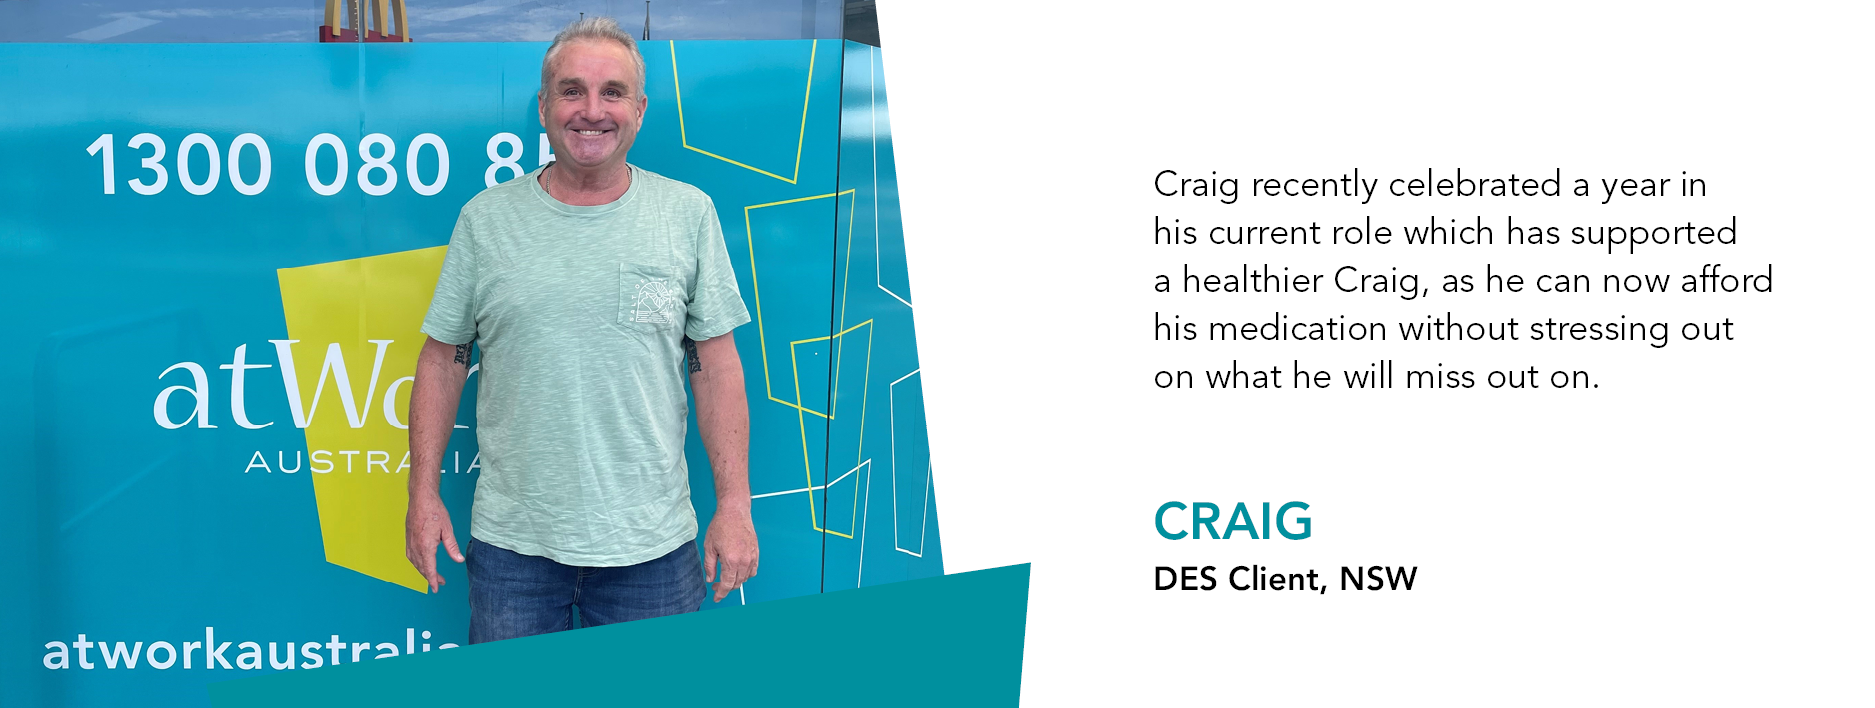 Craig stands proudly in front of atWork Australia. Text reads "Craig recently celebrated a year in his current role which has supported a healthier Craig, as he can now afford the medication he needs without wondering what he will miss out on."